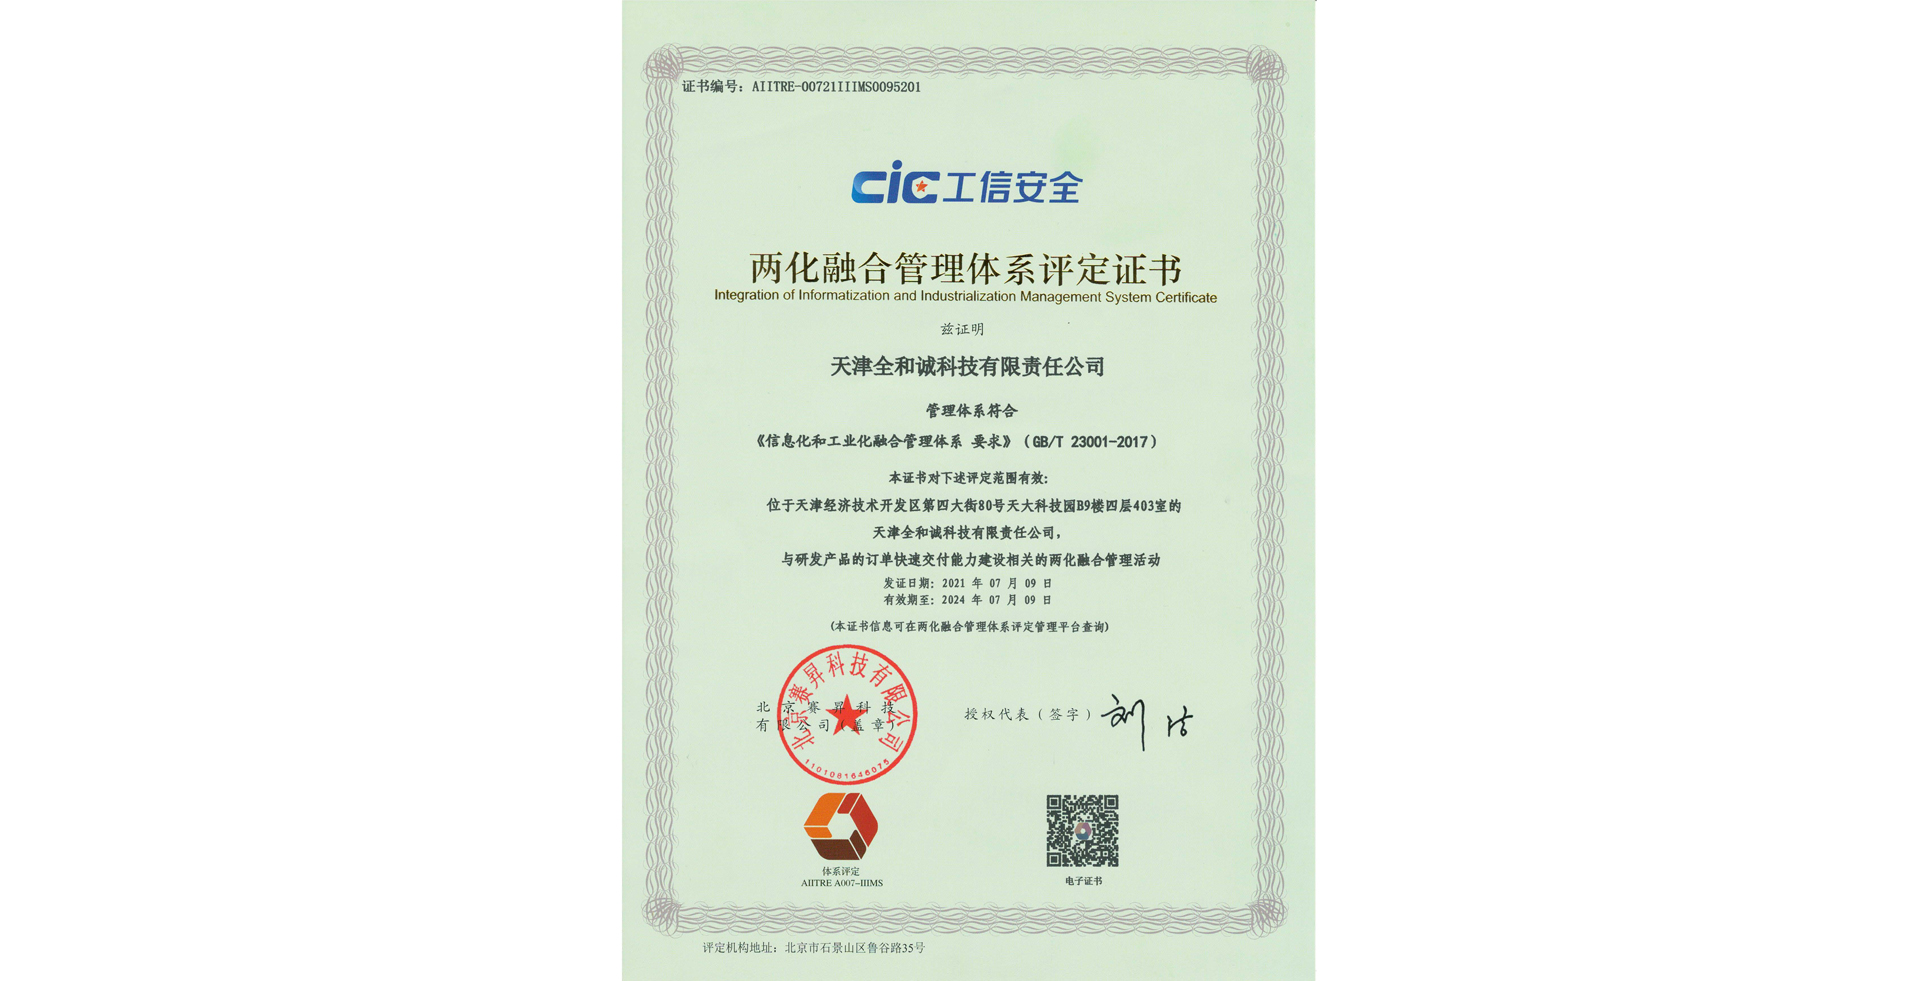 Warmly congratulate our company on successfully passing the evaluation of the integration management system of informatization and industrialization